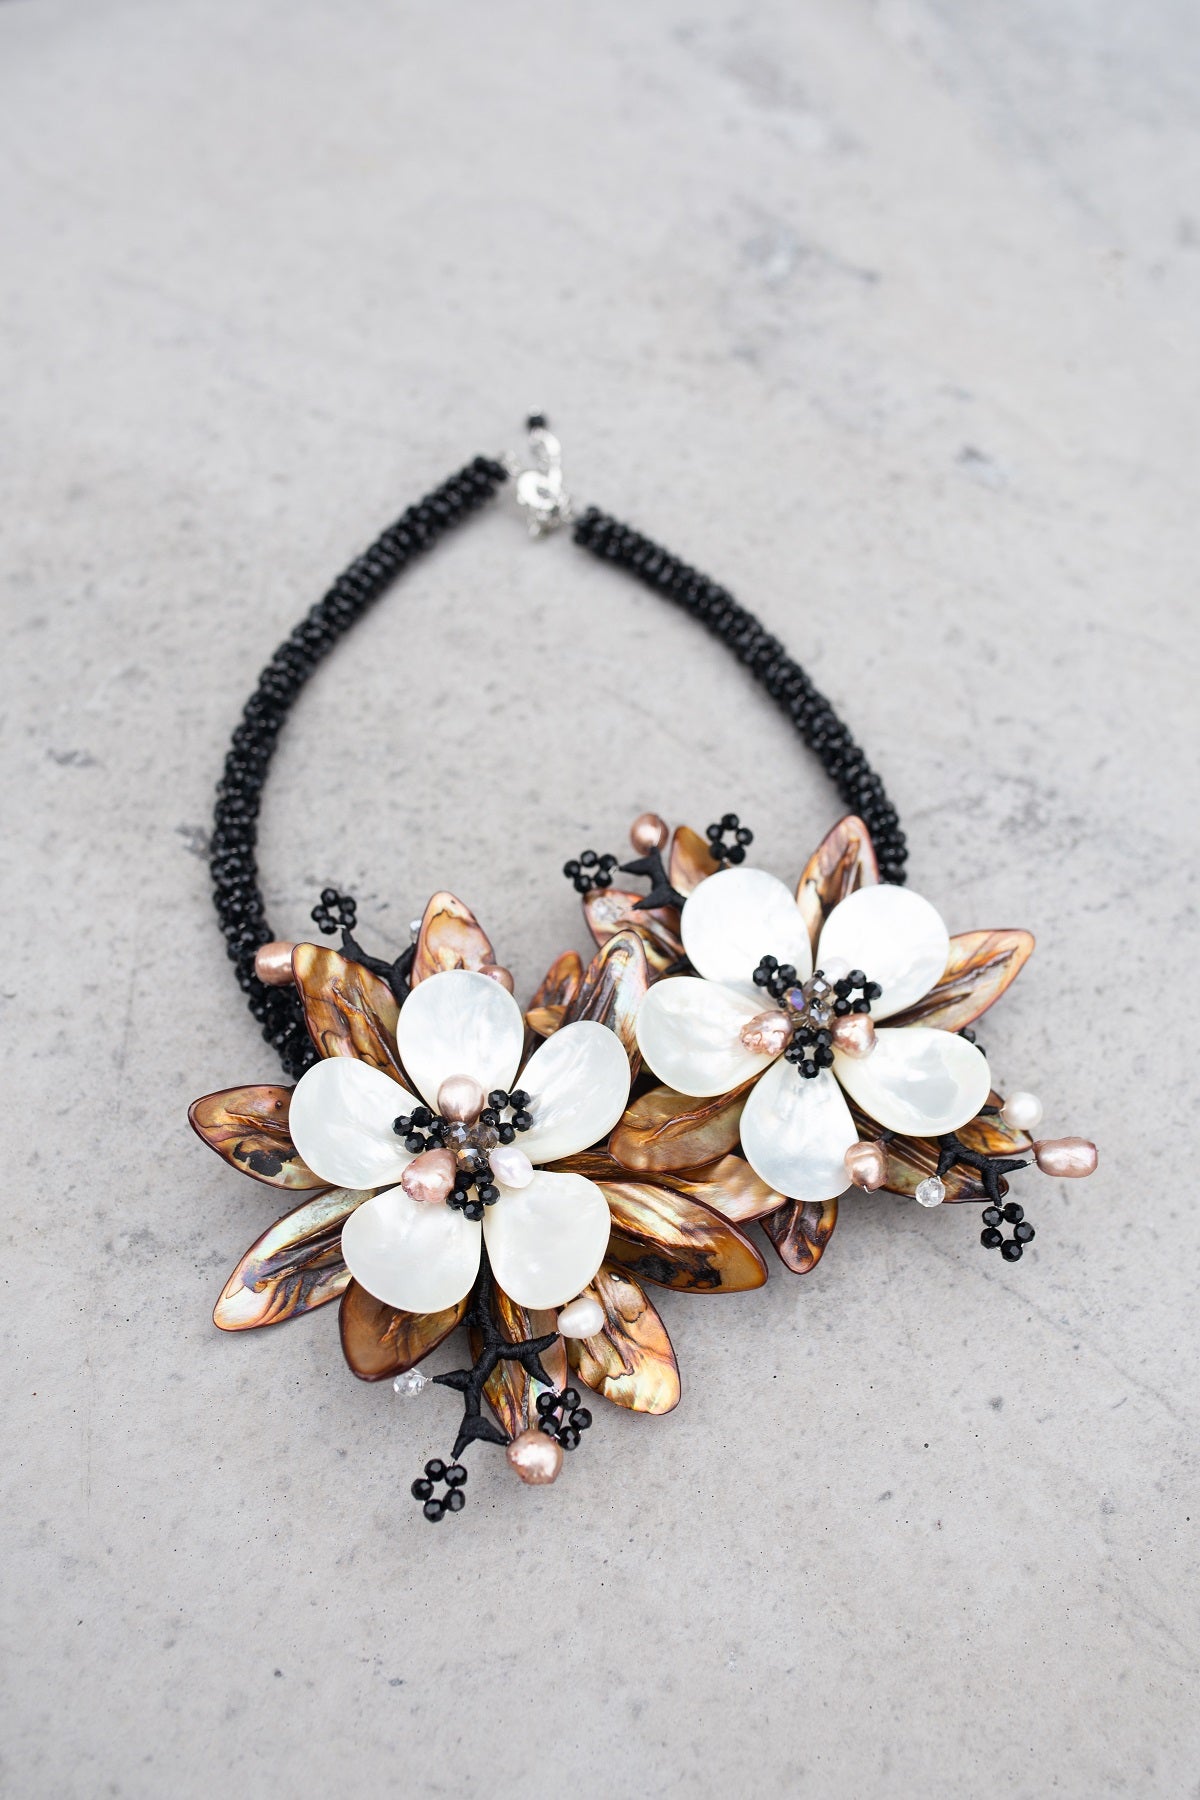 Mother Pearl Mother Mop Pearl Shell Flower Chunky Pearl Necklace Set From  Dong1240, $96.99 | DHgate.Com